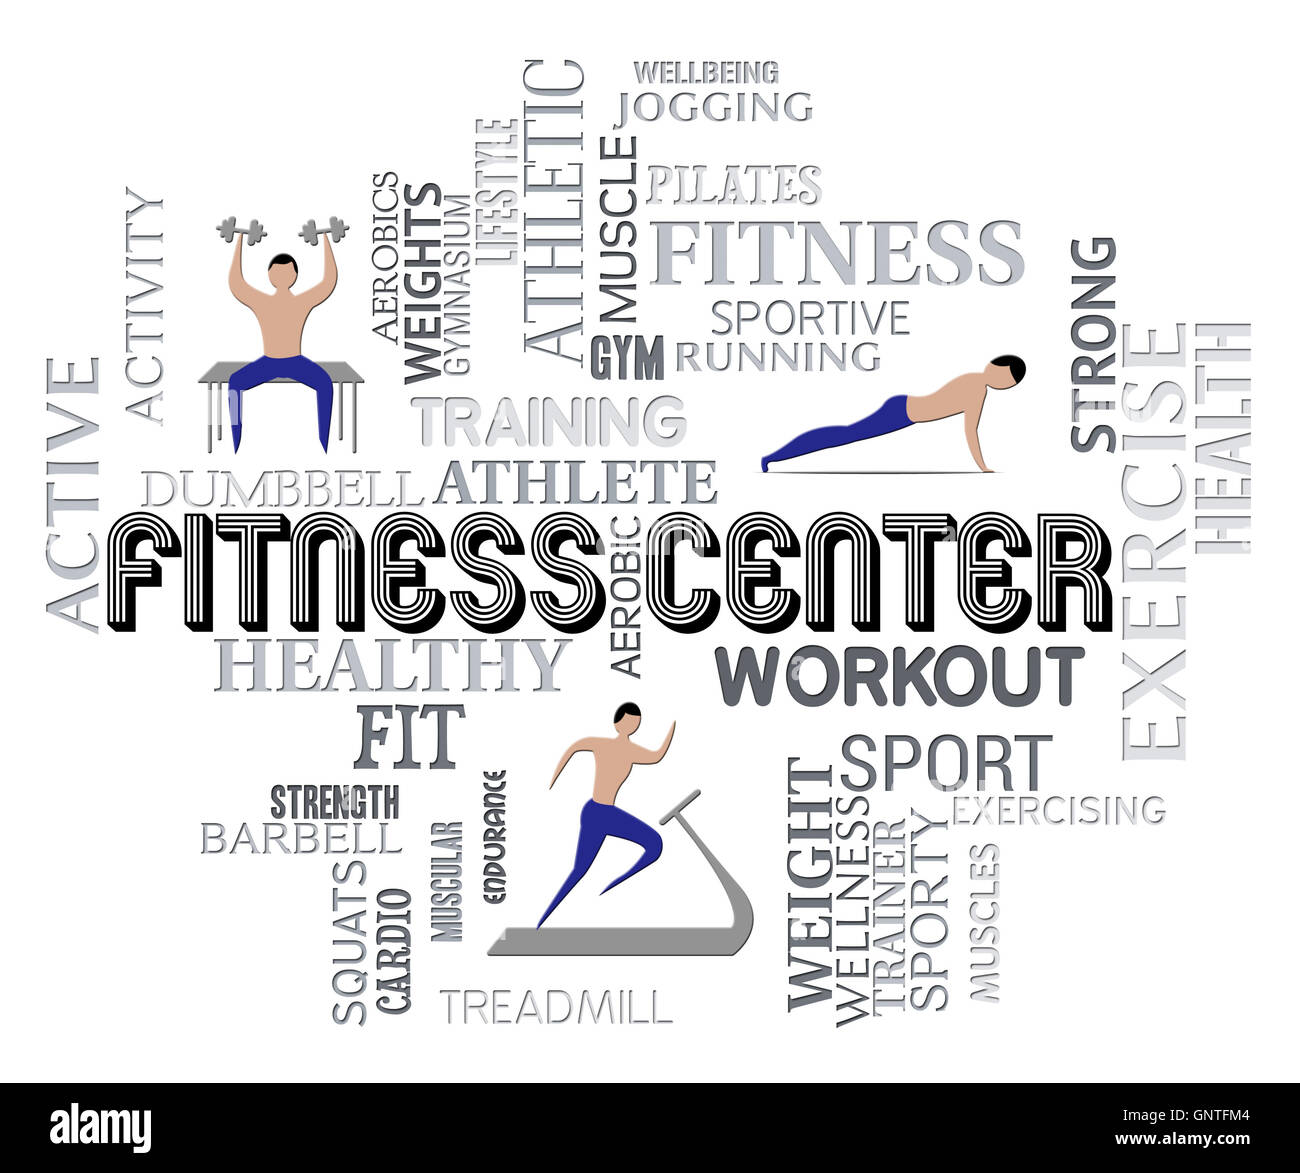 Fitness Center Meaning Work Out And Getting Fit Stock Photo - Alamy